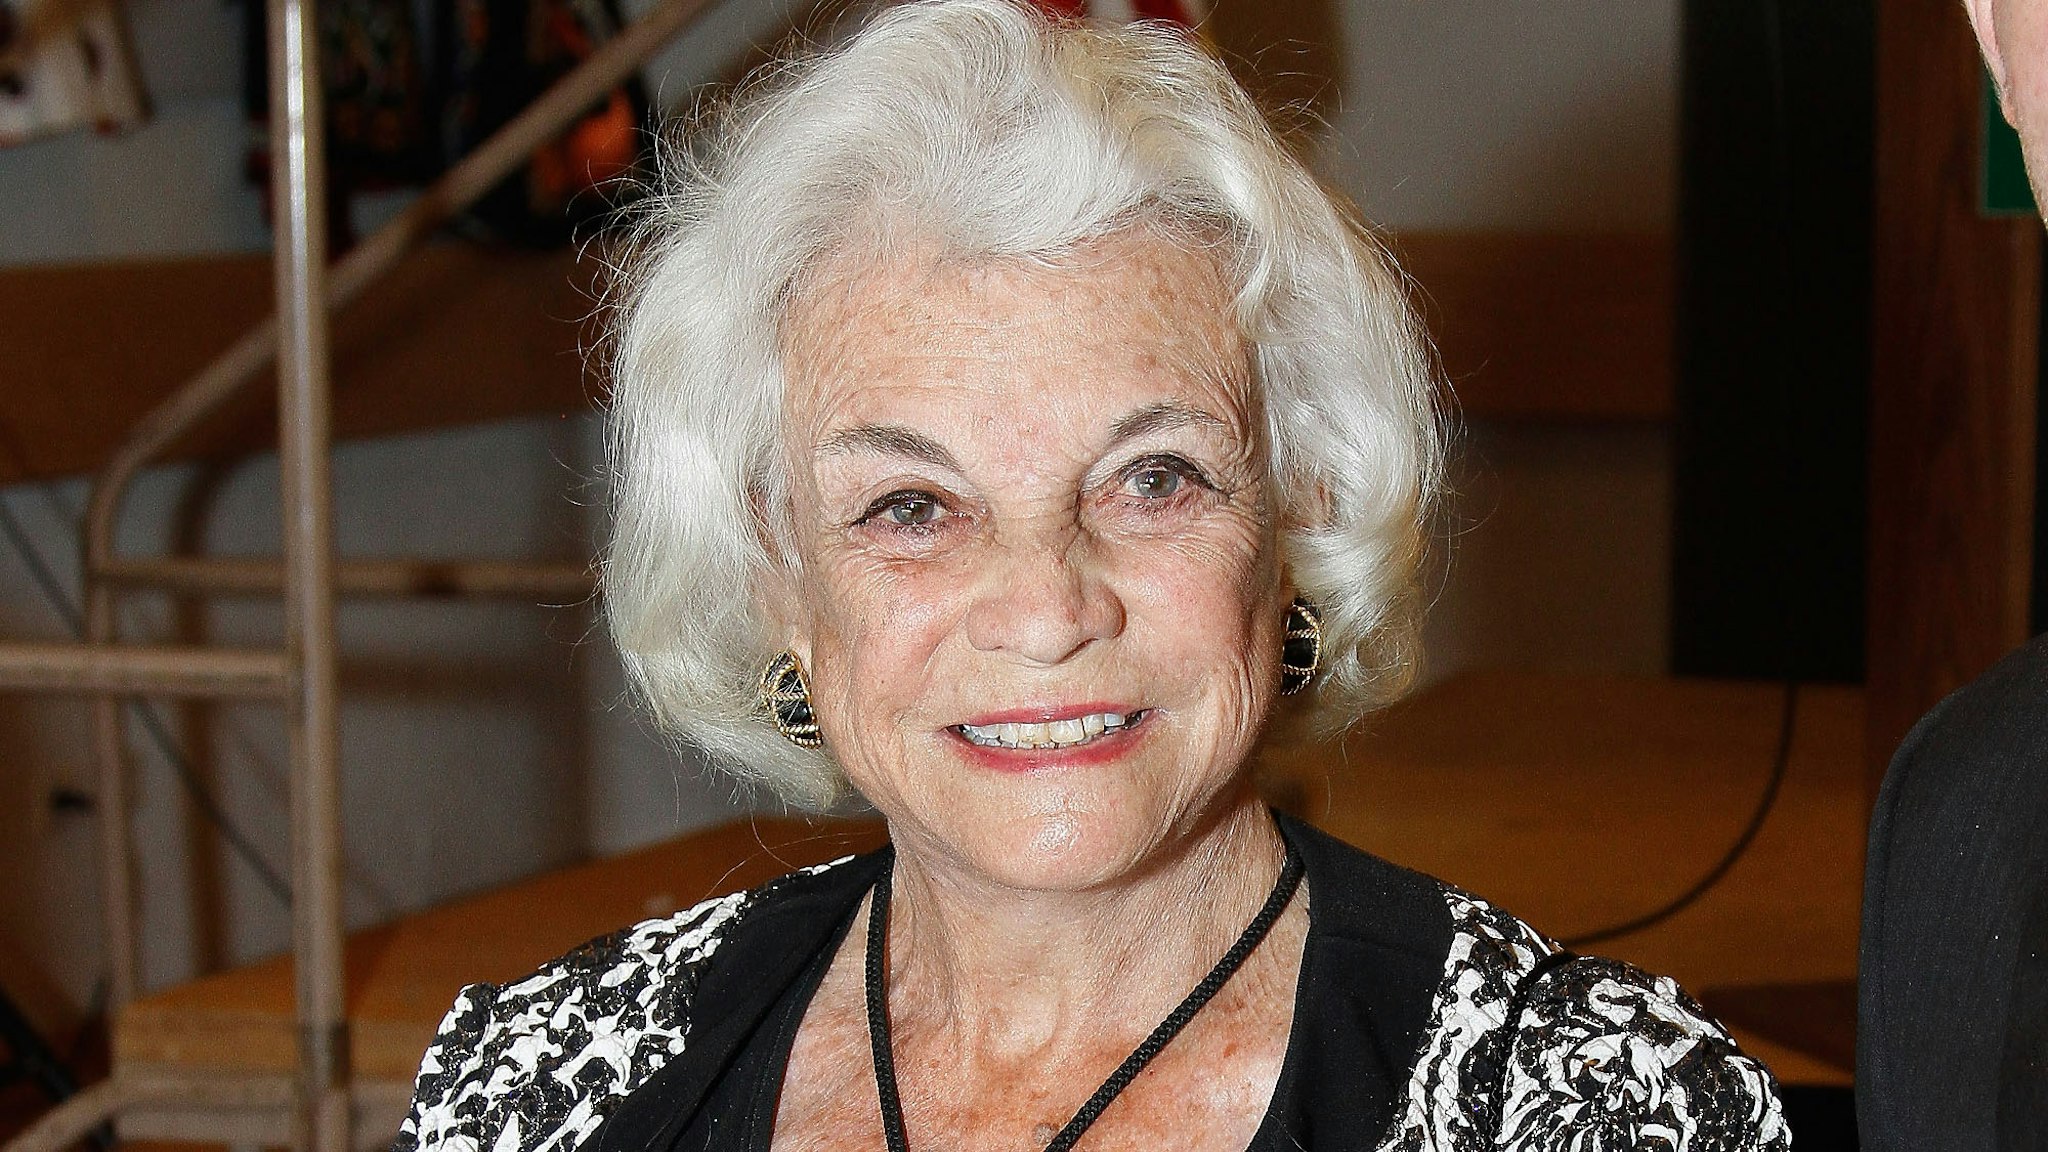 PHOENIX, AZ - JANUARY 16: Associate Justice of the Supreme Court of the United States (Ret.) Sandra Day O'Connor poses before receiving the prestigious Anam Cara Award at the Irish Cultural Center on January 16, 2014 in Phoenix, Arizona.